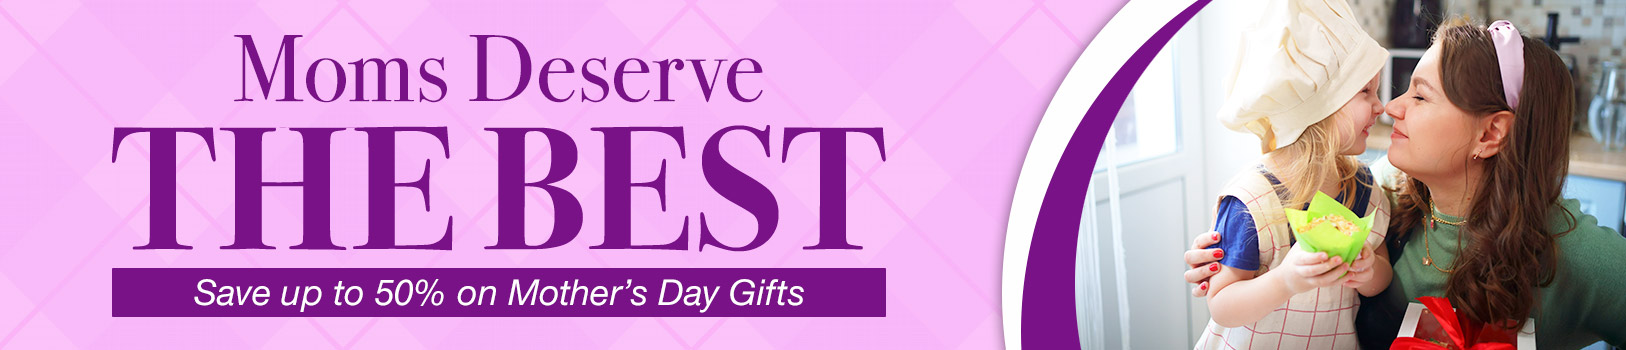 Blain's Farm & Fleet - Save up to 50% on Mother’s Day Must-Haves